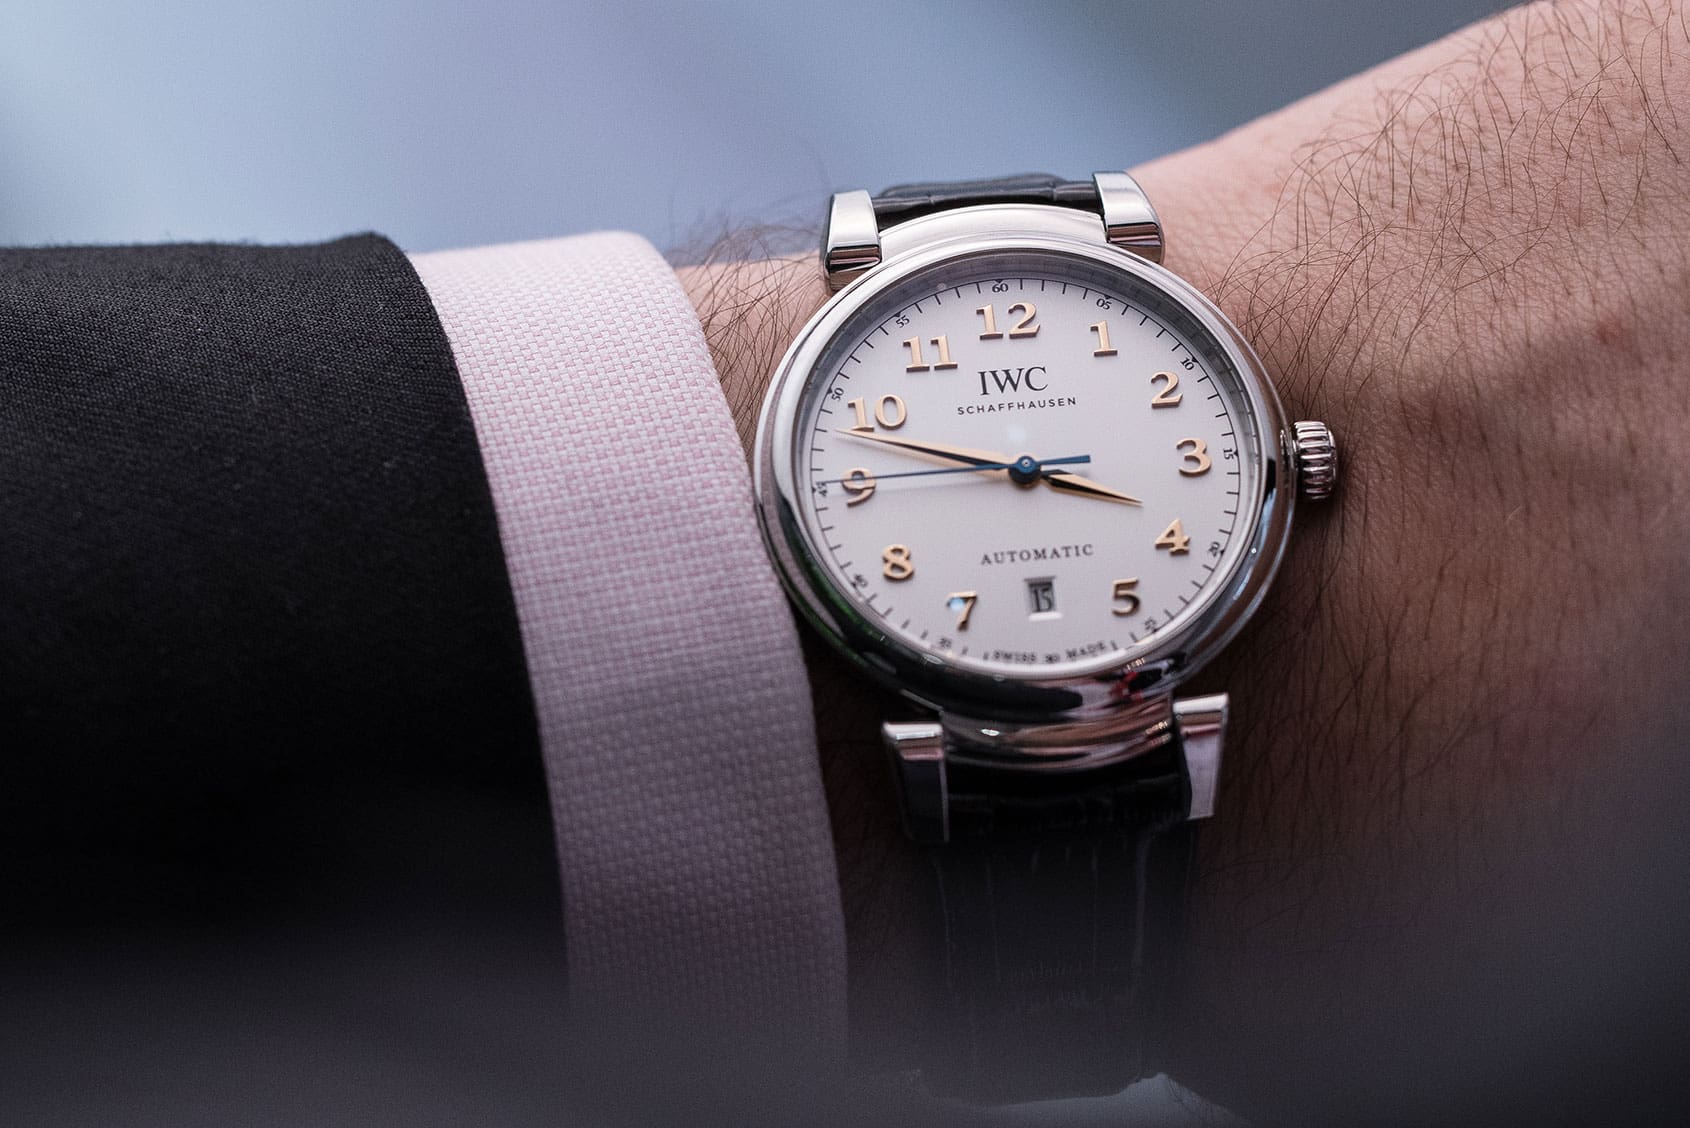 GONE IN 60 SECONDS: The Da Vinci Automatic shows the gentler side of IWC